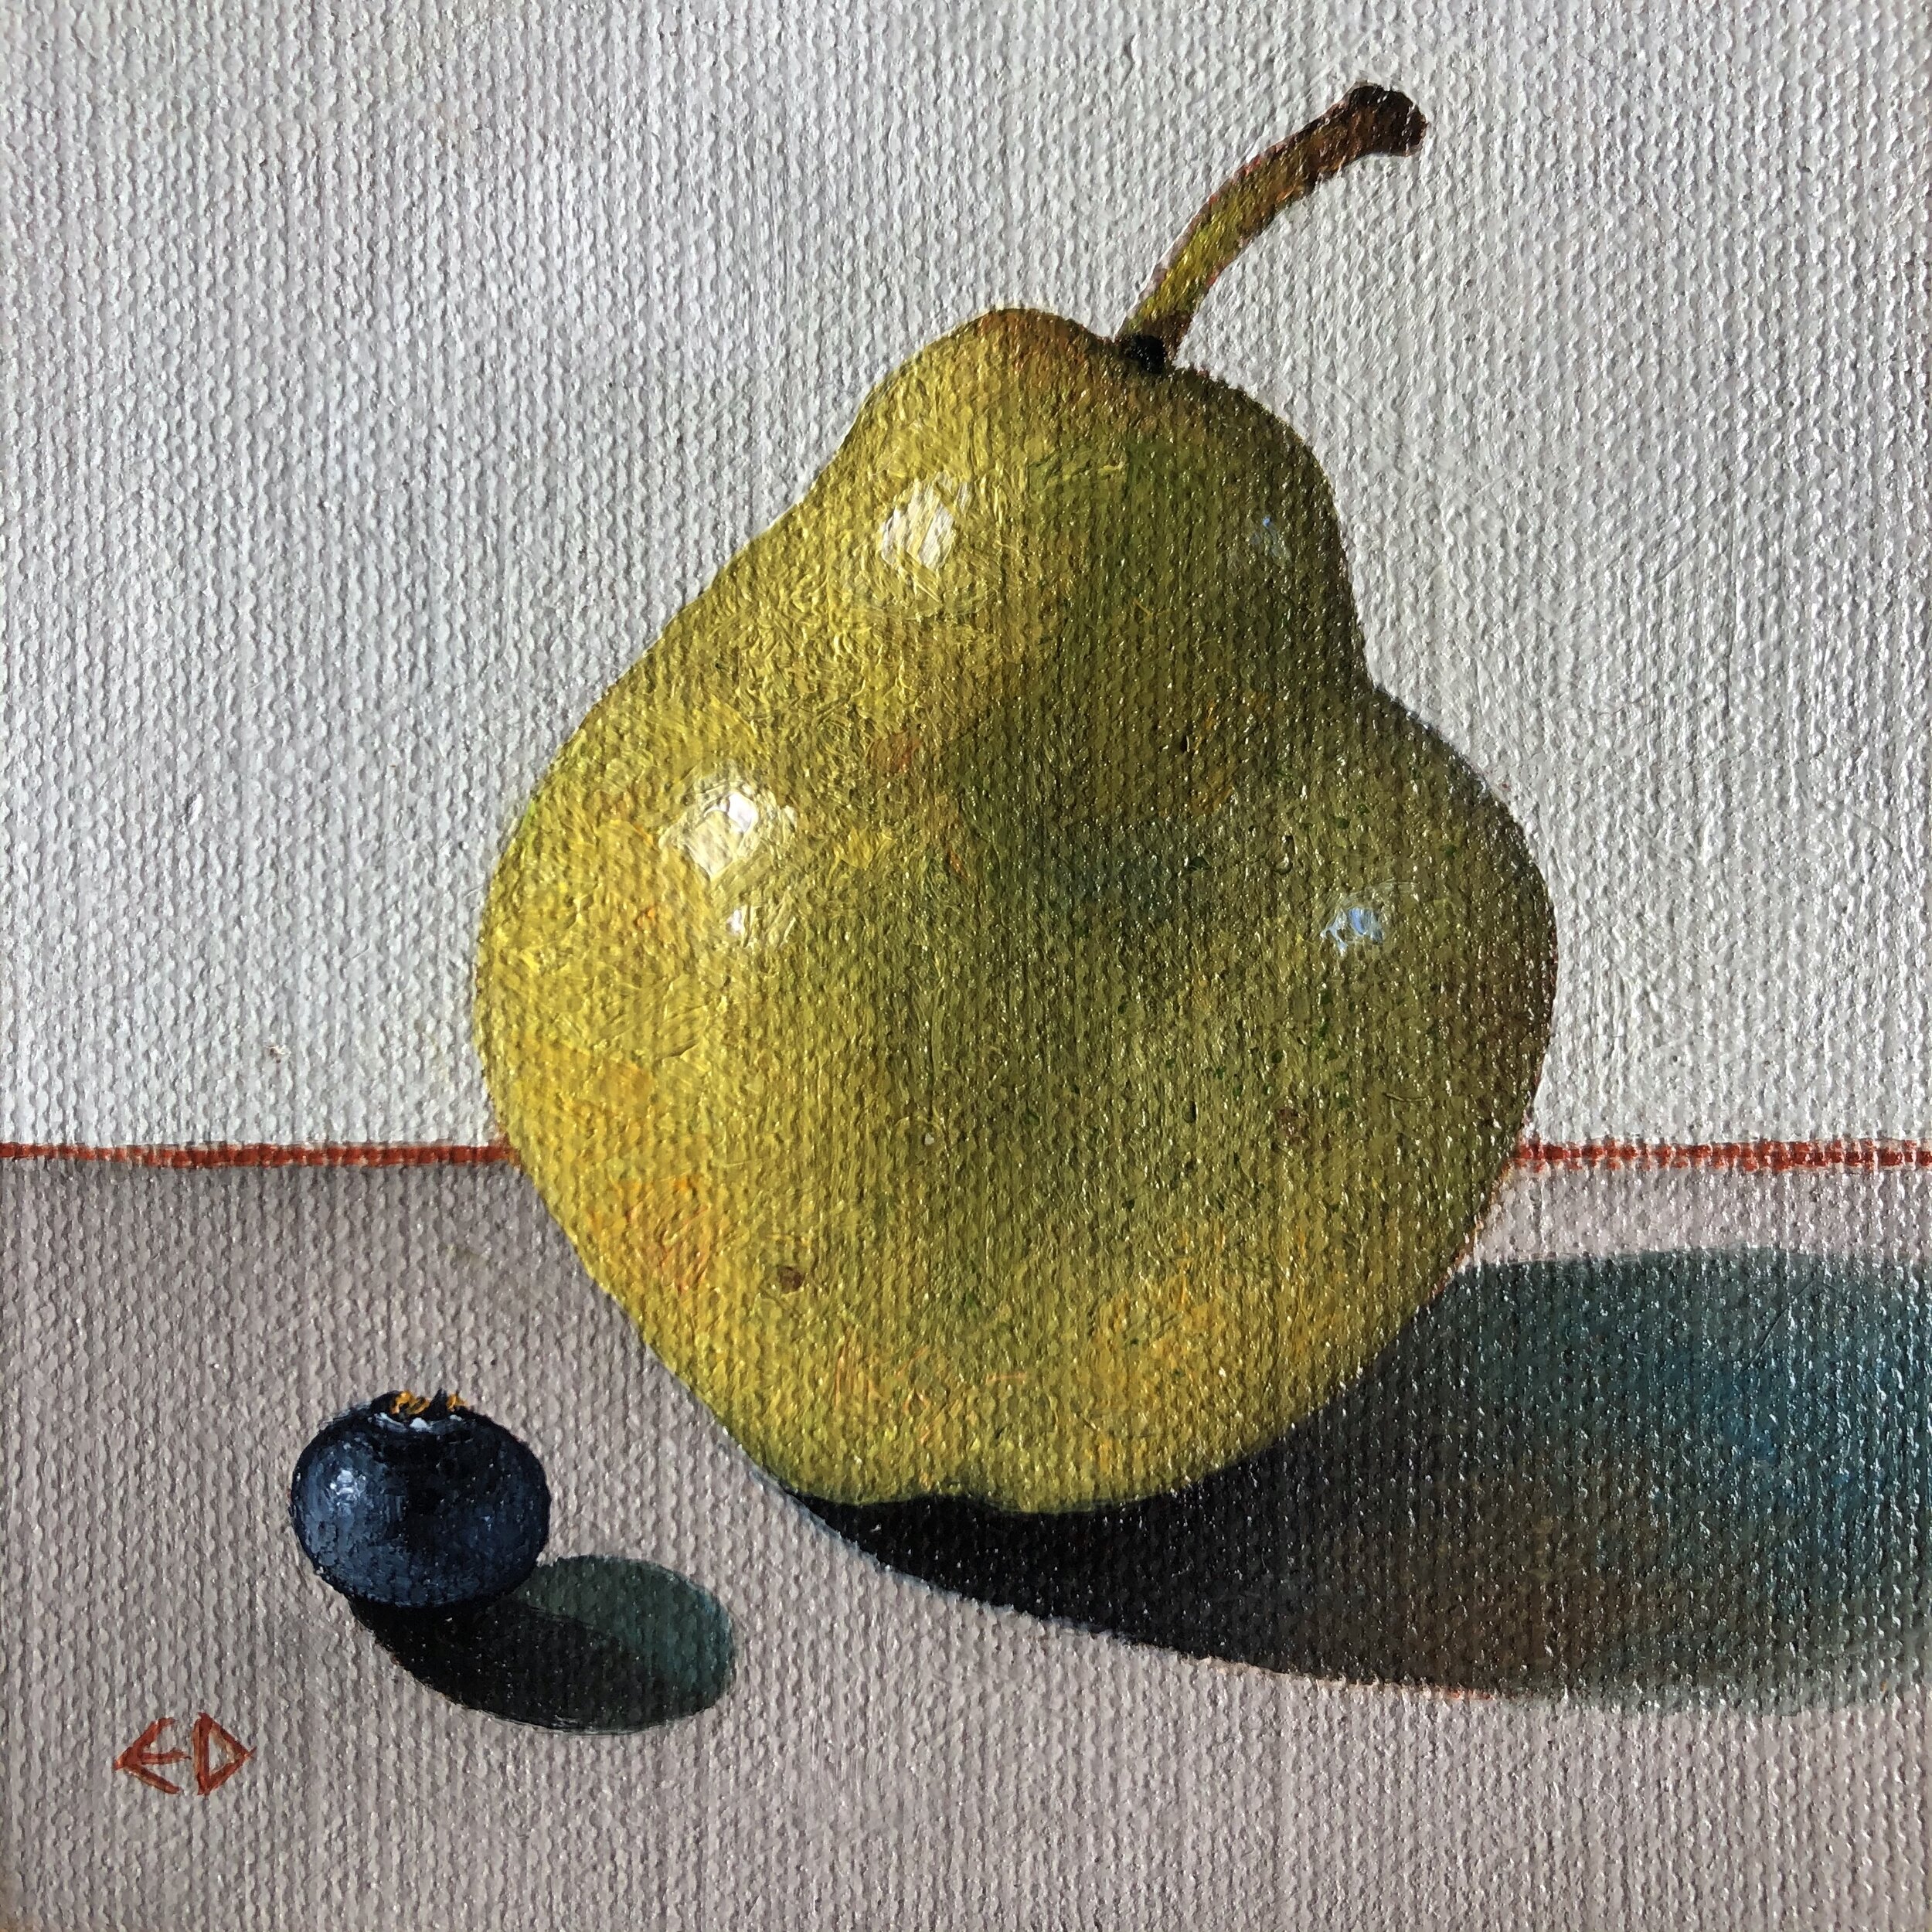 Little green pear with blueberry